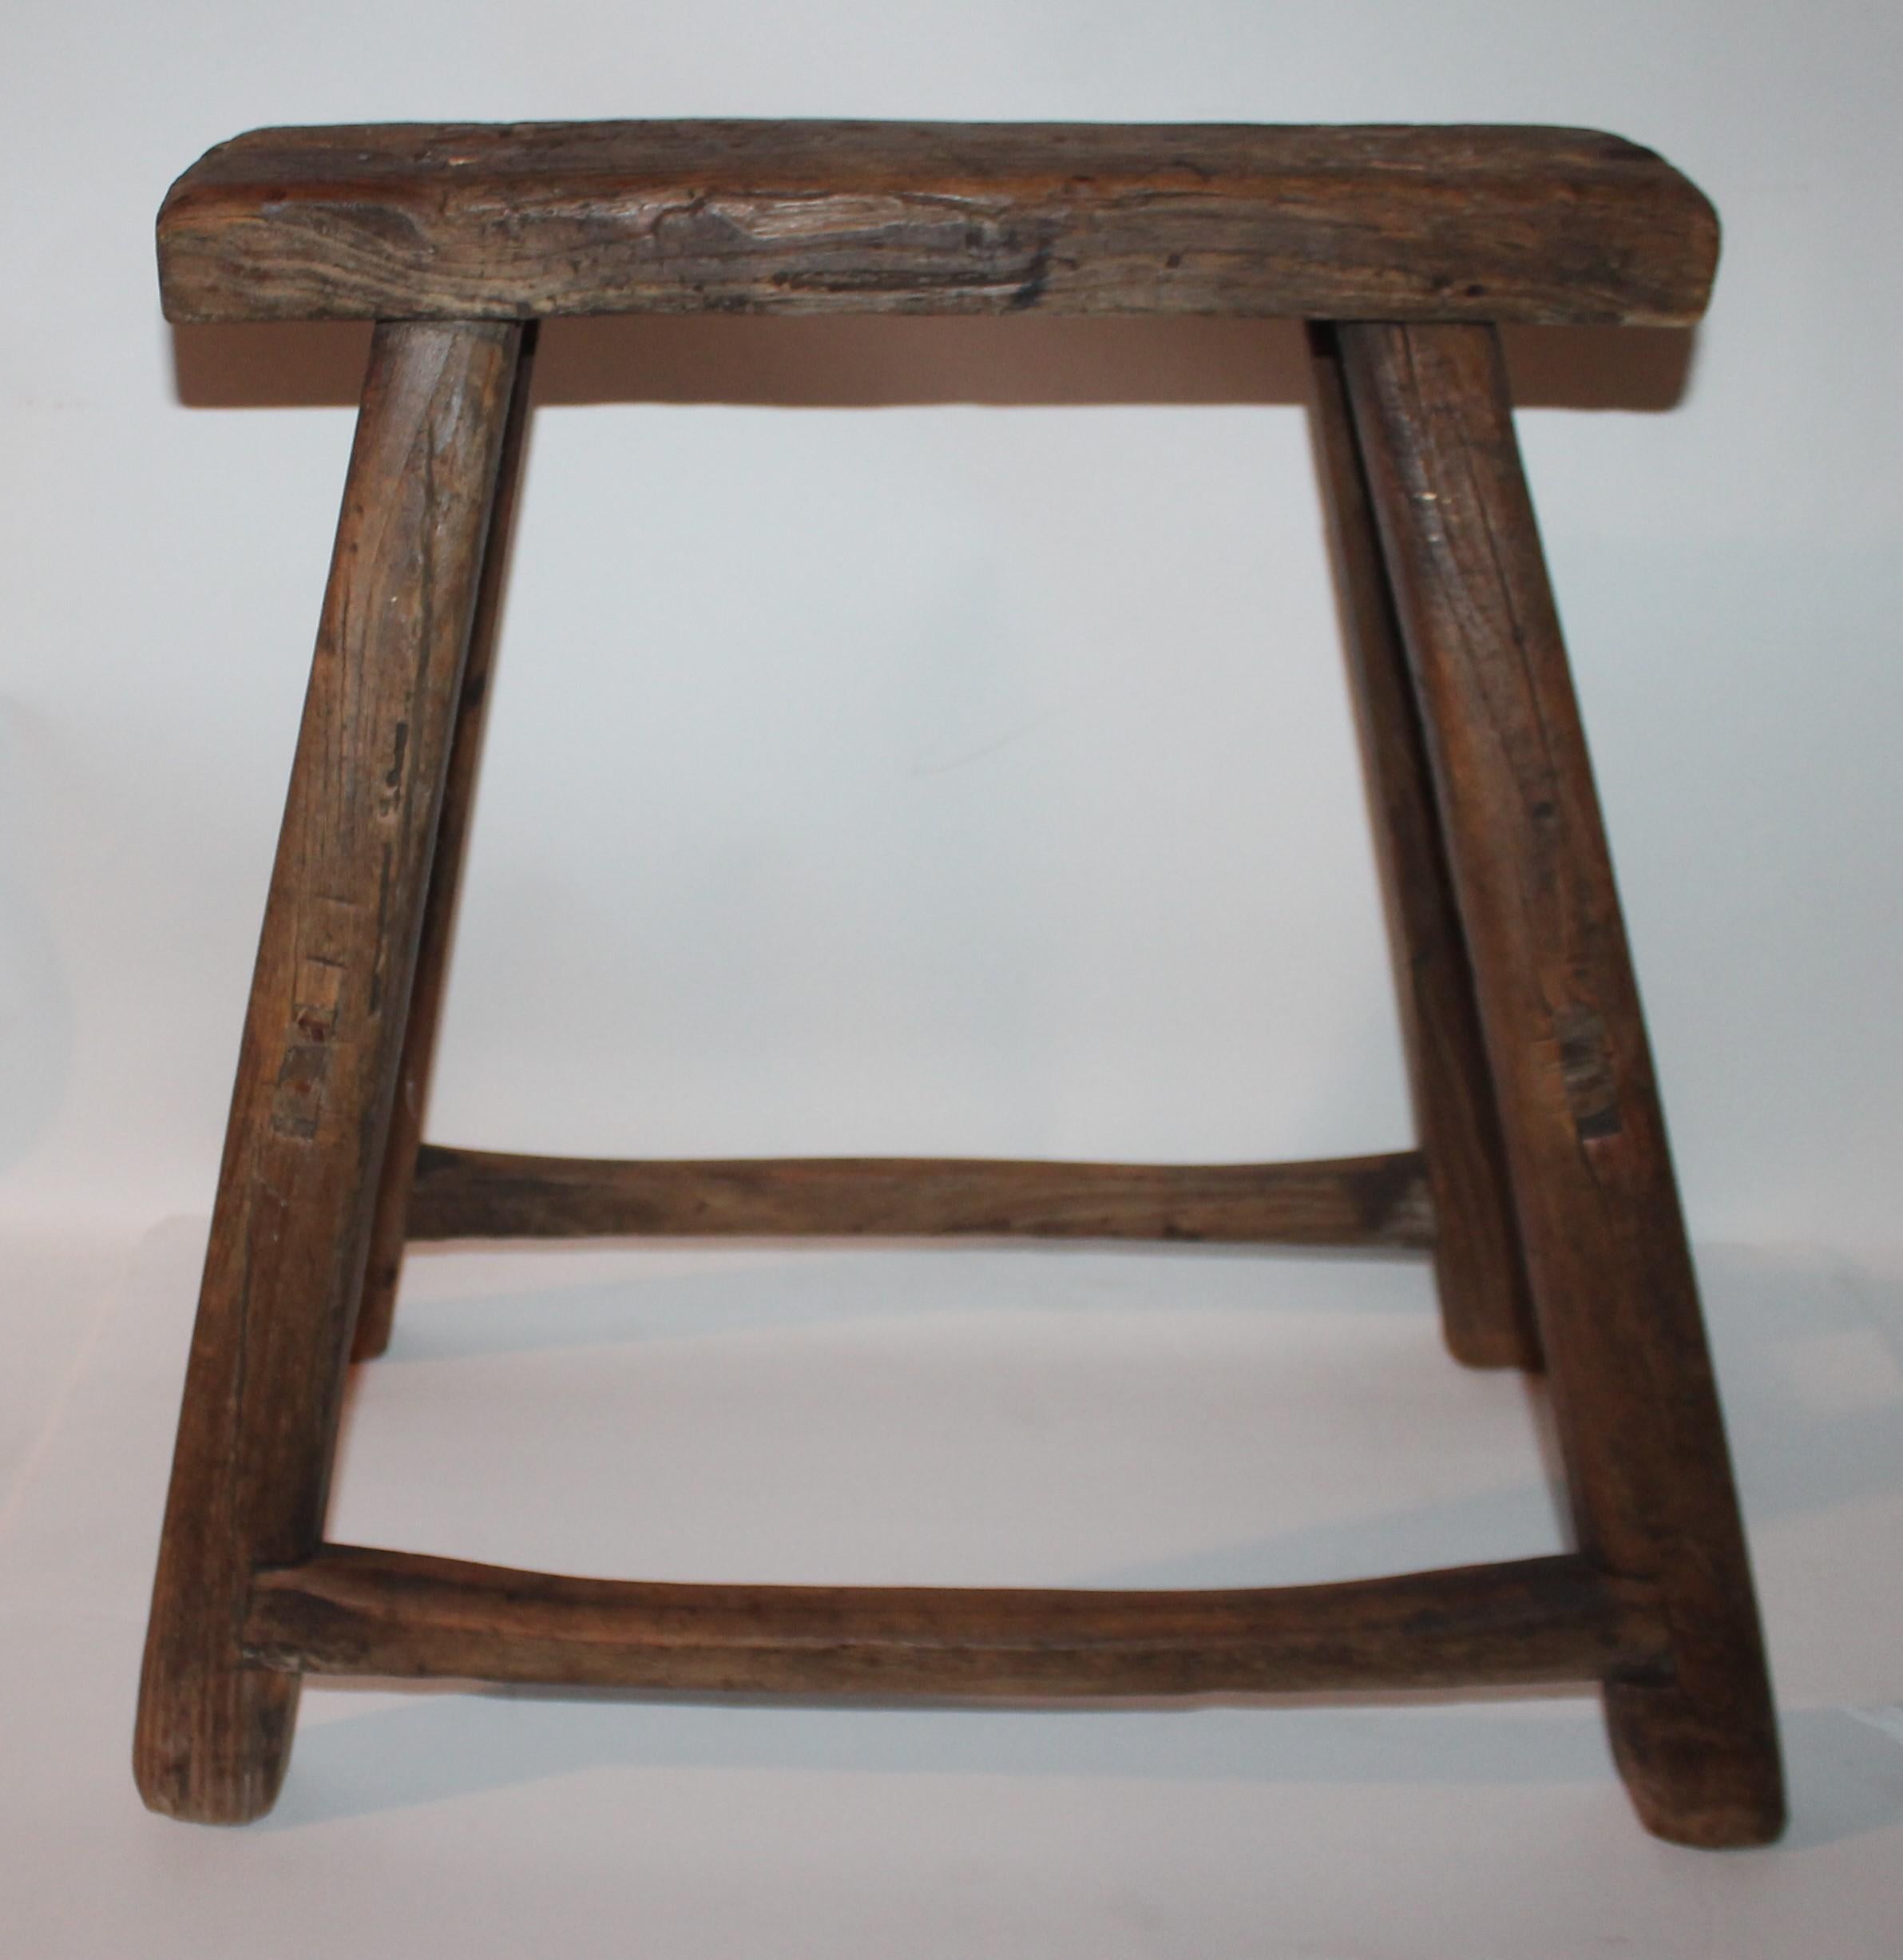 This 19th century handmade and mortised & peg construction was found in the mid west. It is strong and sturdy. Great form and patina.